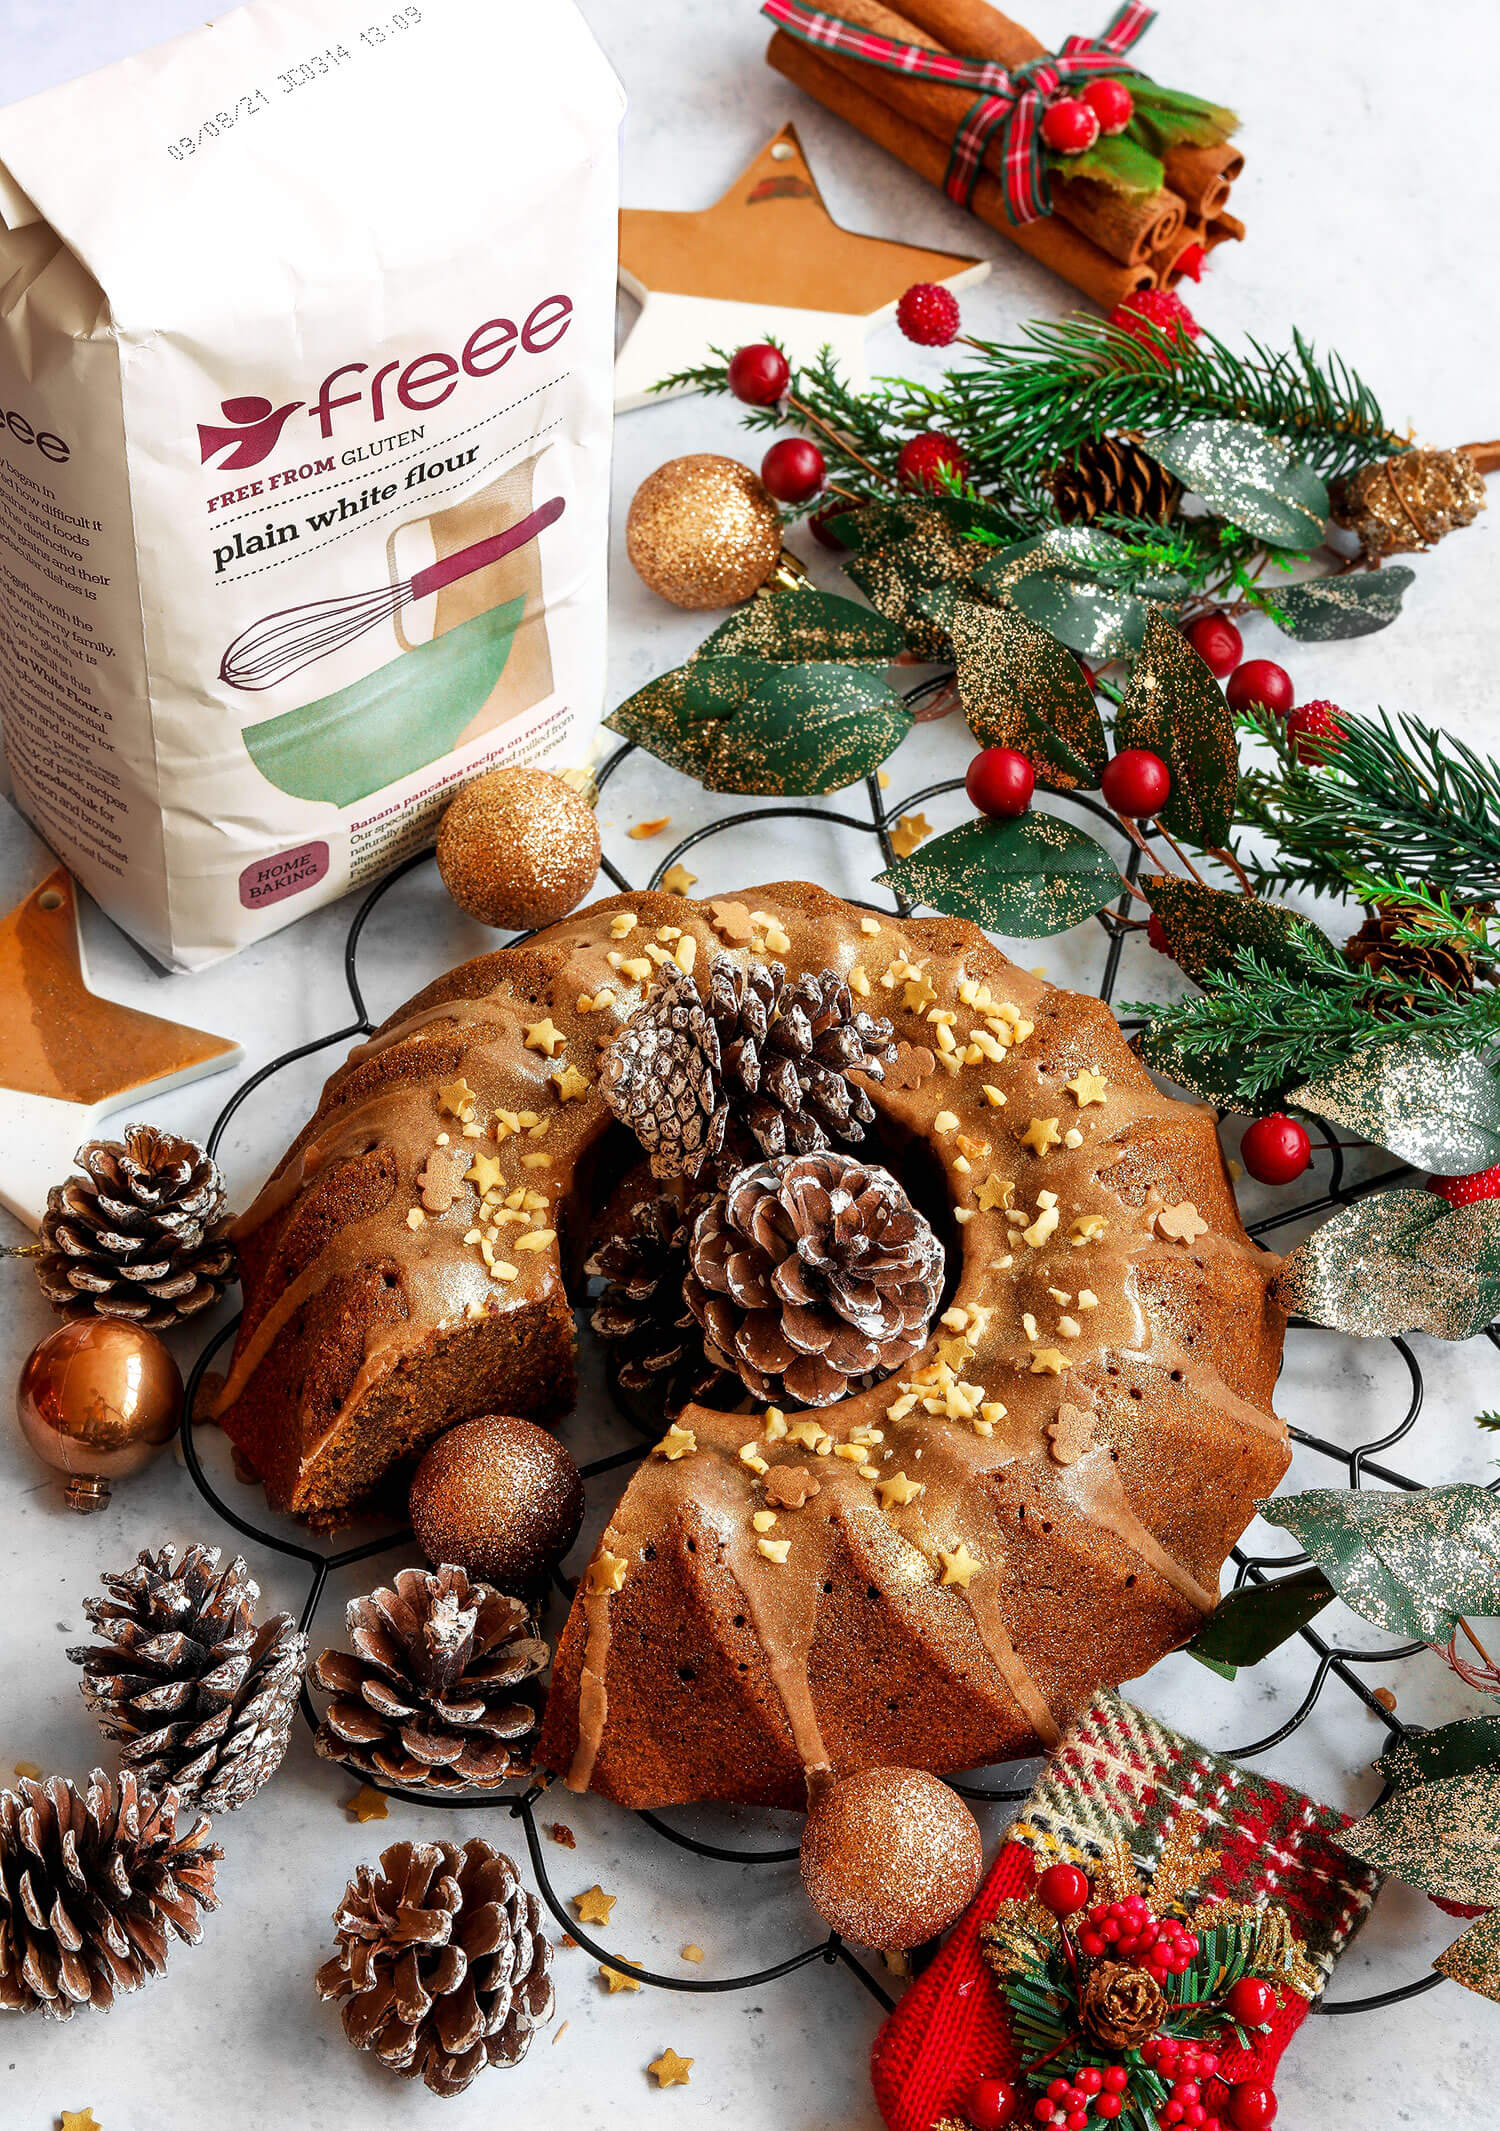 Gingerbread Bundt Cake: Soft and Festive Holiday Dessert - 31 Daily